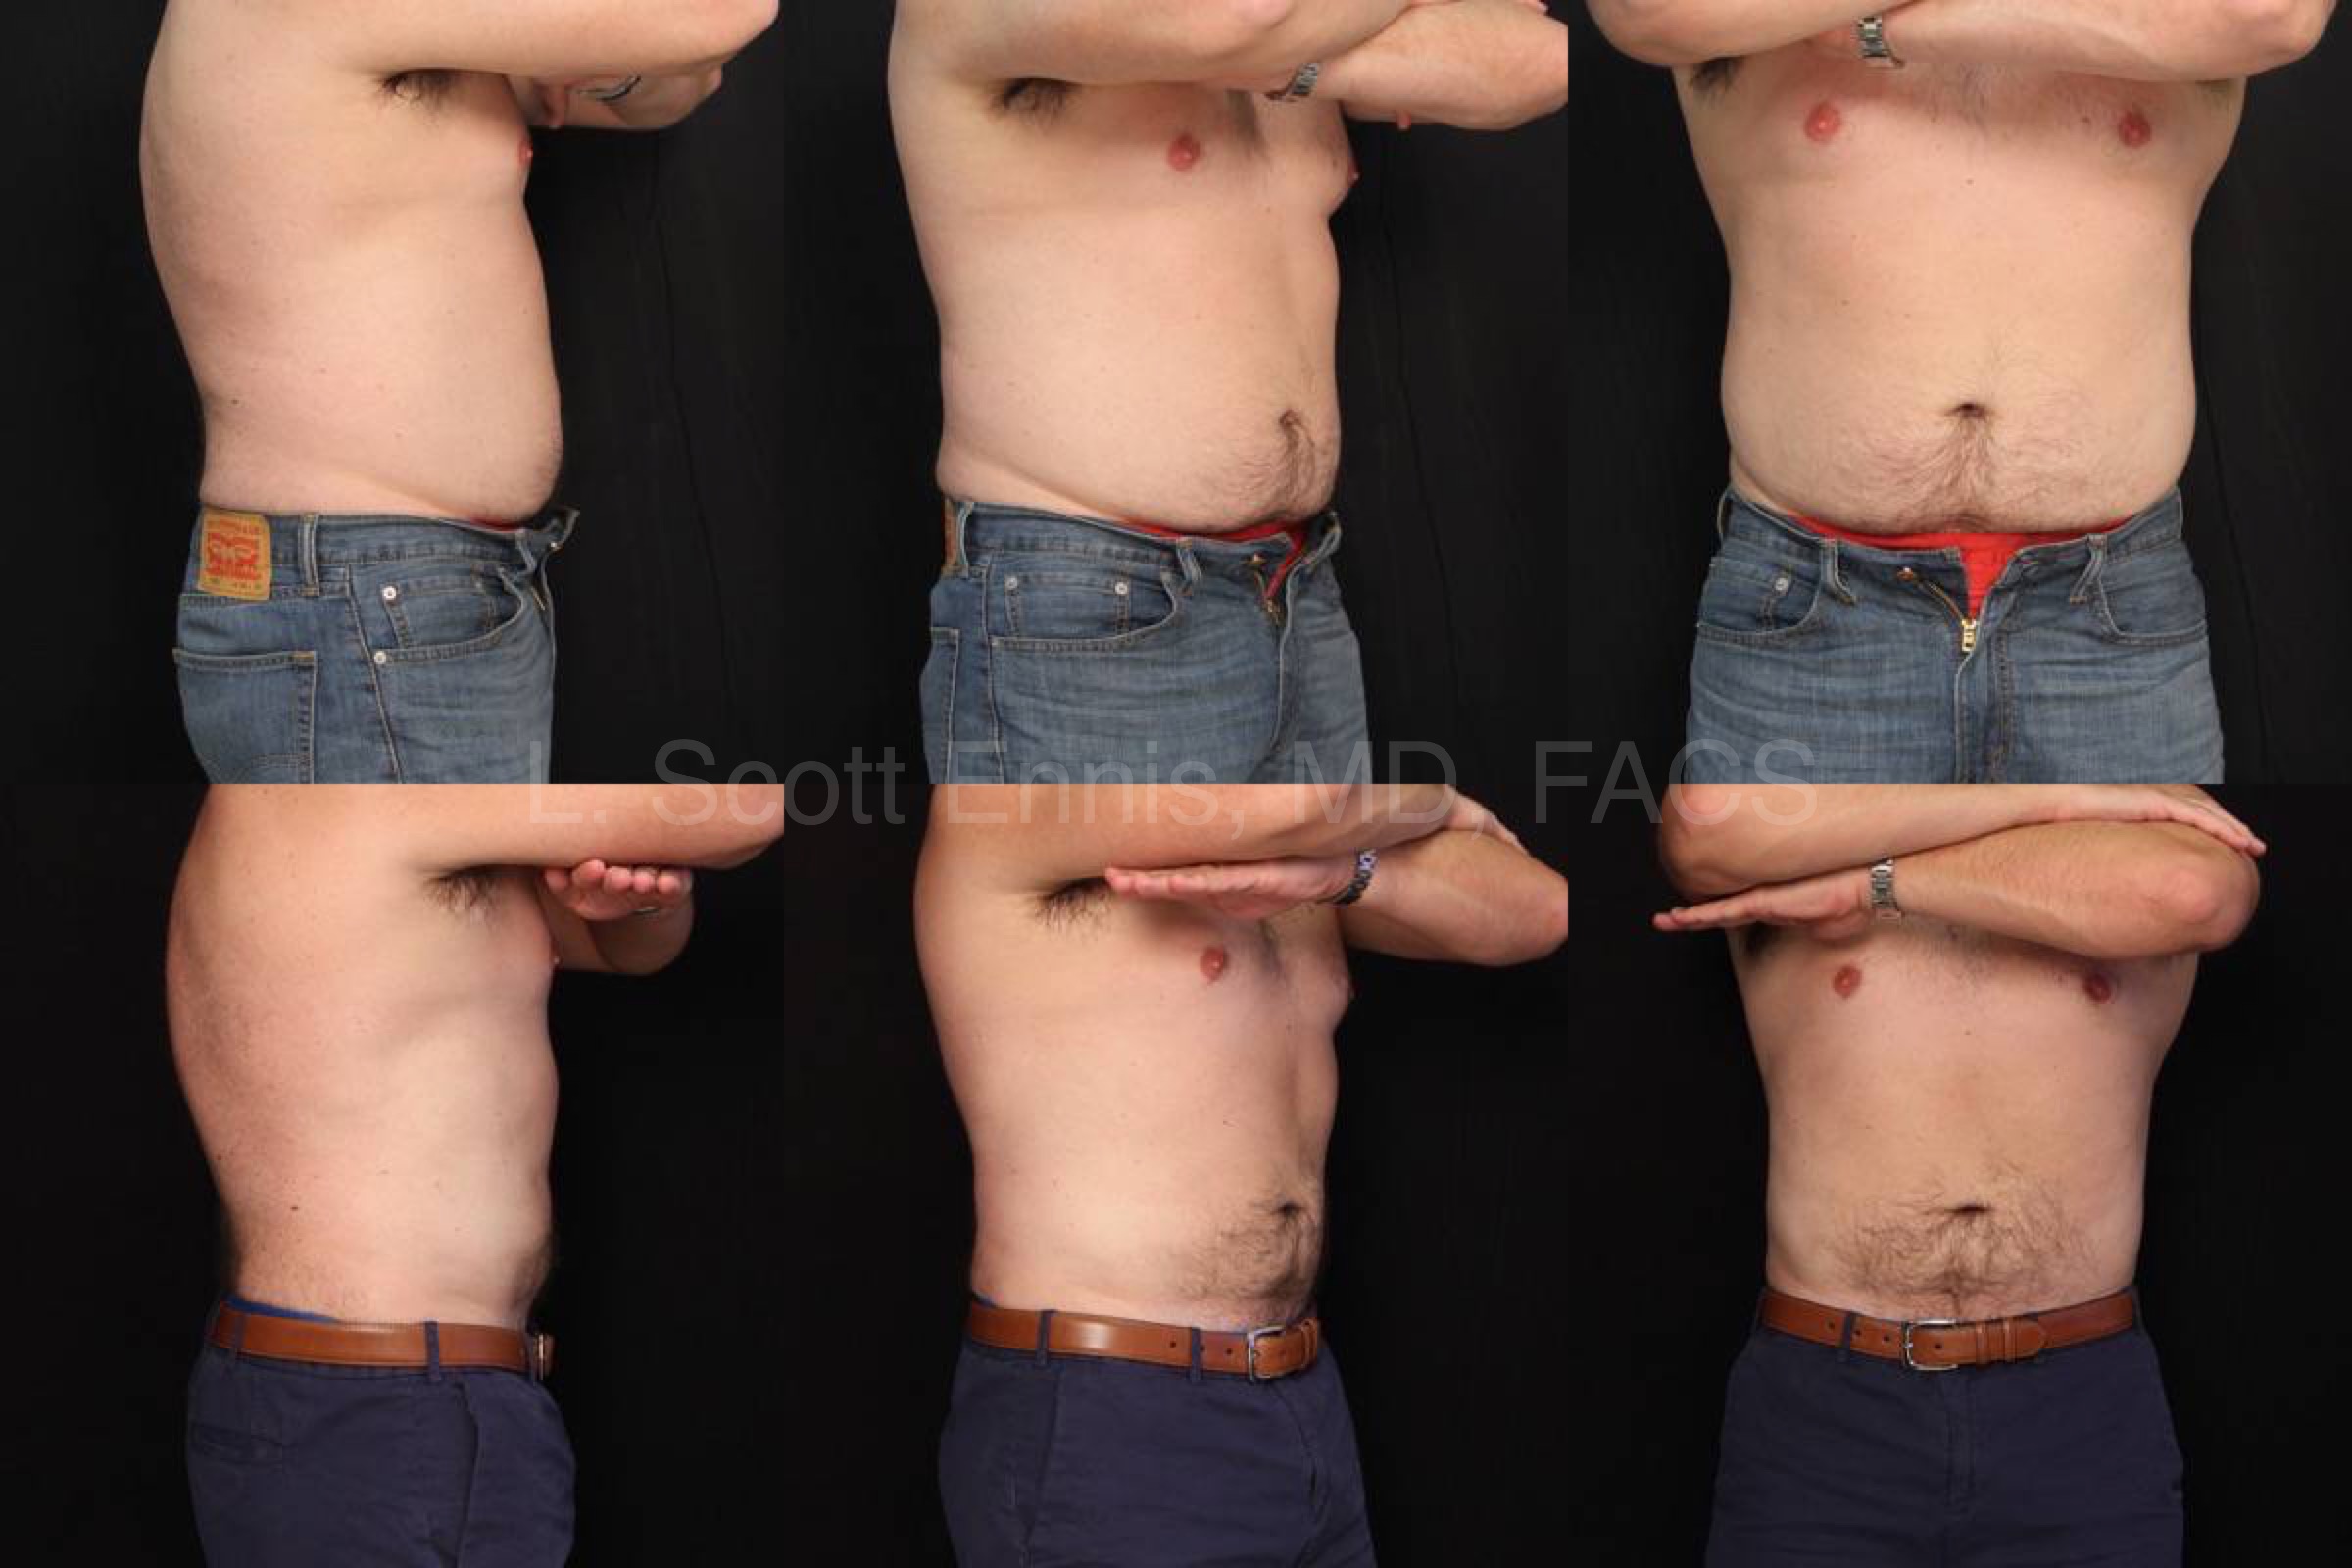 Liposuction of Abdomen_ Hips and Chest Before and After Ennis Plastic Surgery Palm Beach Boca Raton Destin Miami Fort Lauderdale